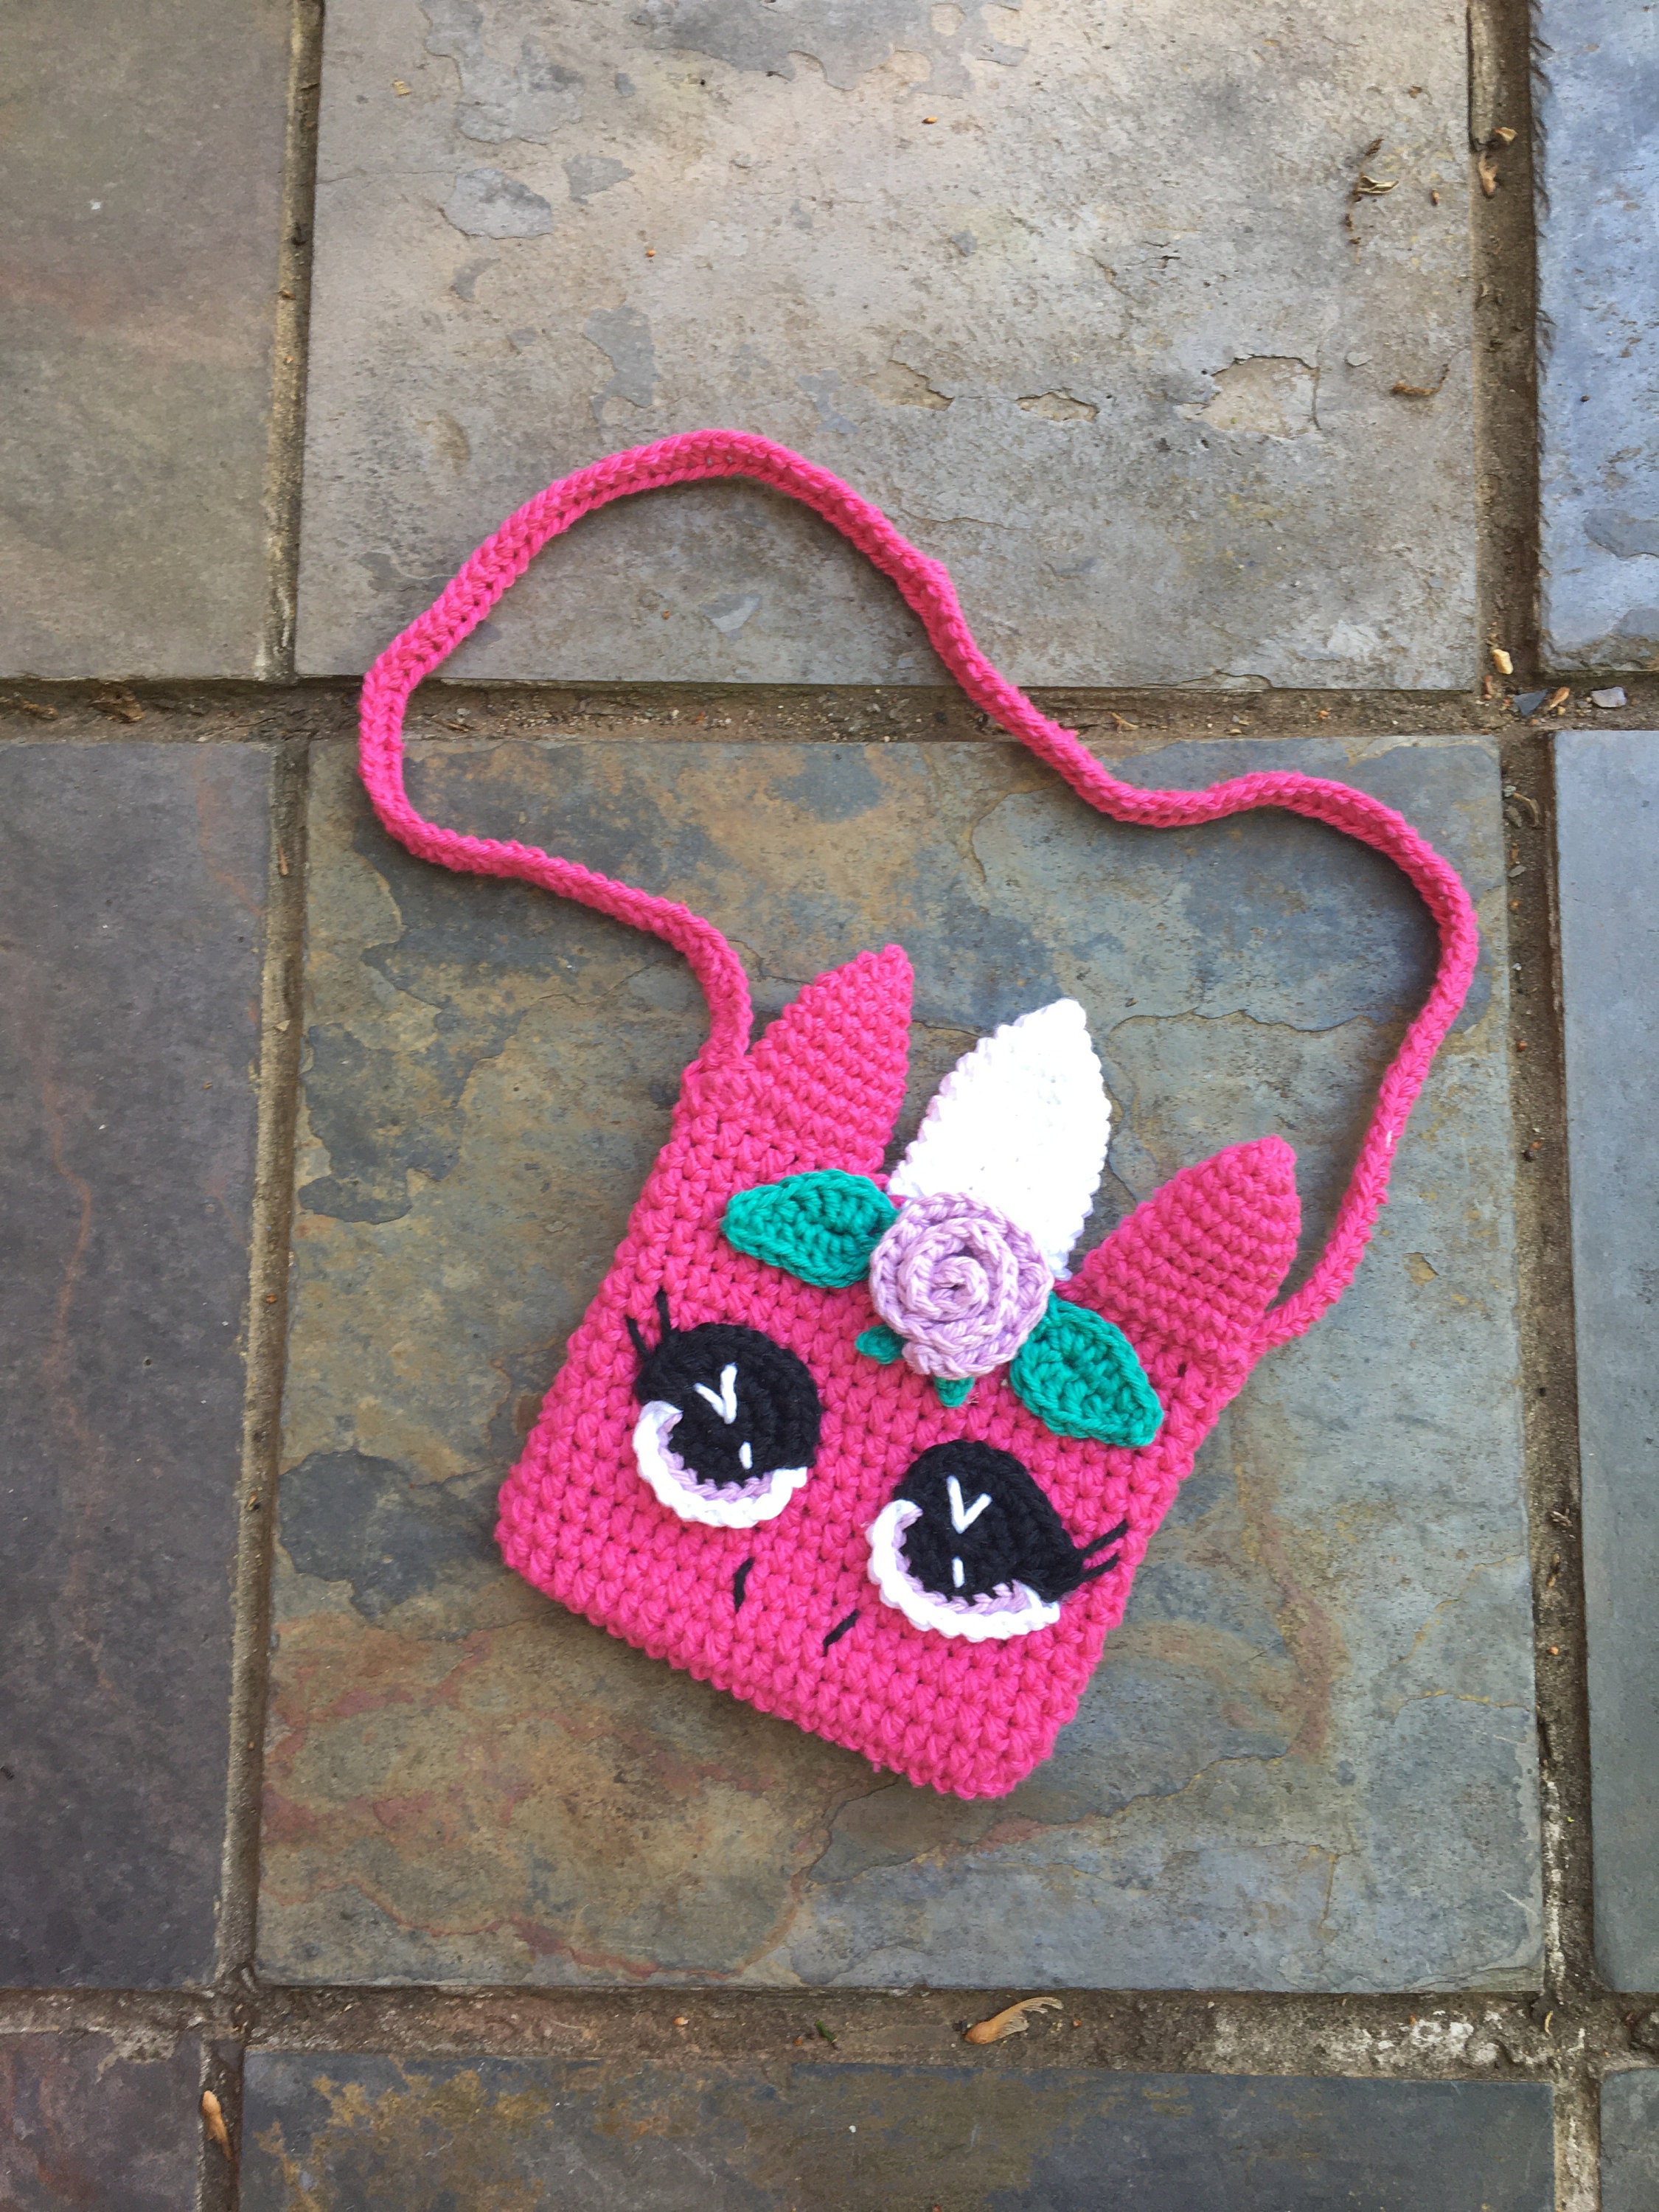 Part 1 | How to Crochet a Unicorn Purse with Zipper and Lining - YouTube